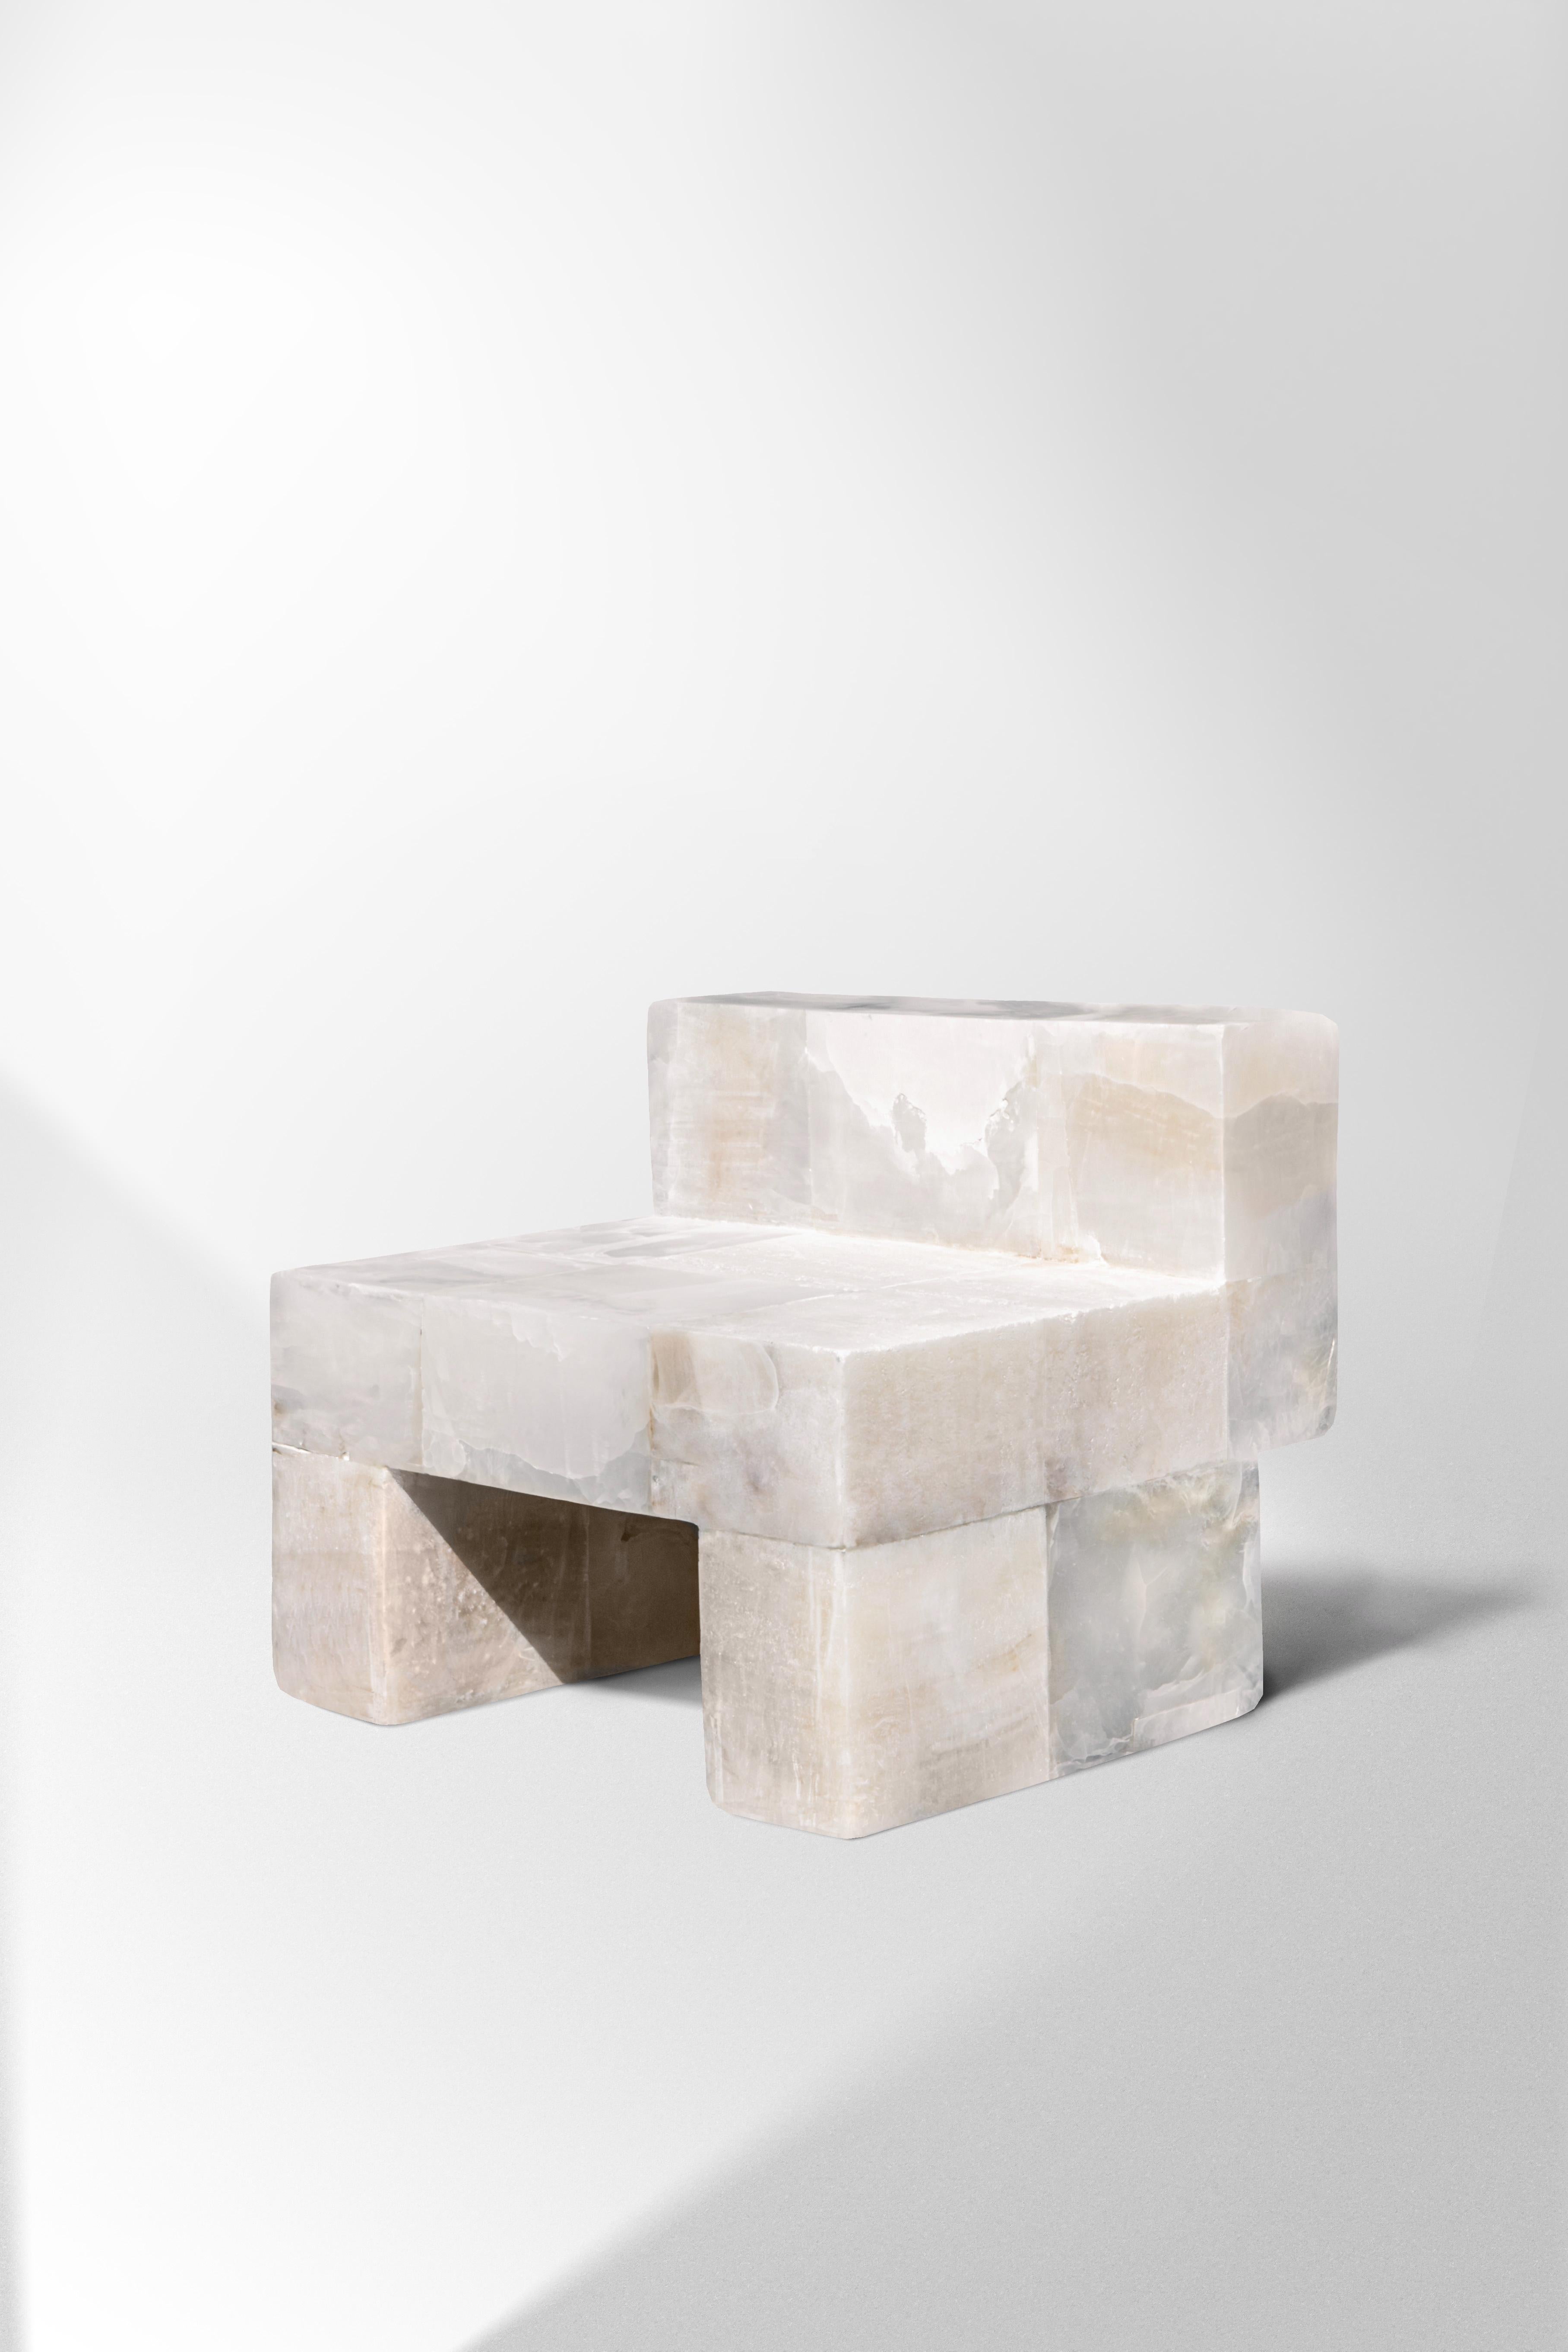 White Onyx Sugar Daddy Chair by Pietro Franceschini
Limited Edition Of 8 Pieces.
Dimensions: D 59 x W 55 x H 50,5 cm.
Materials: White onyx.

Pietro Franceschini is an architect and designer based in New York and Florence. He was educated in Italy,